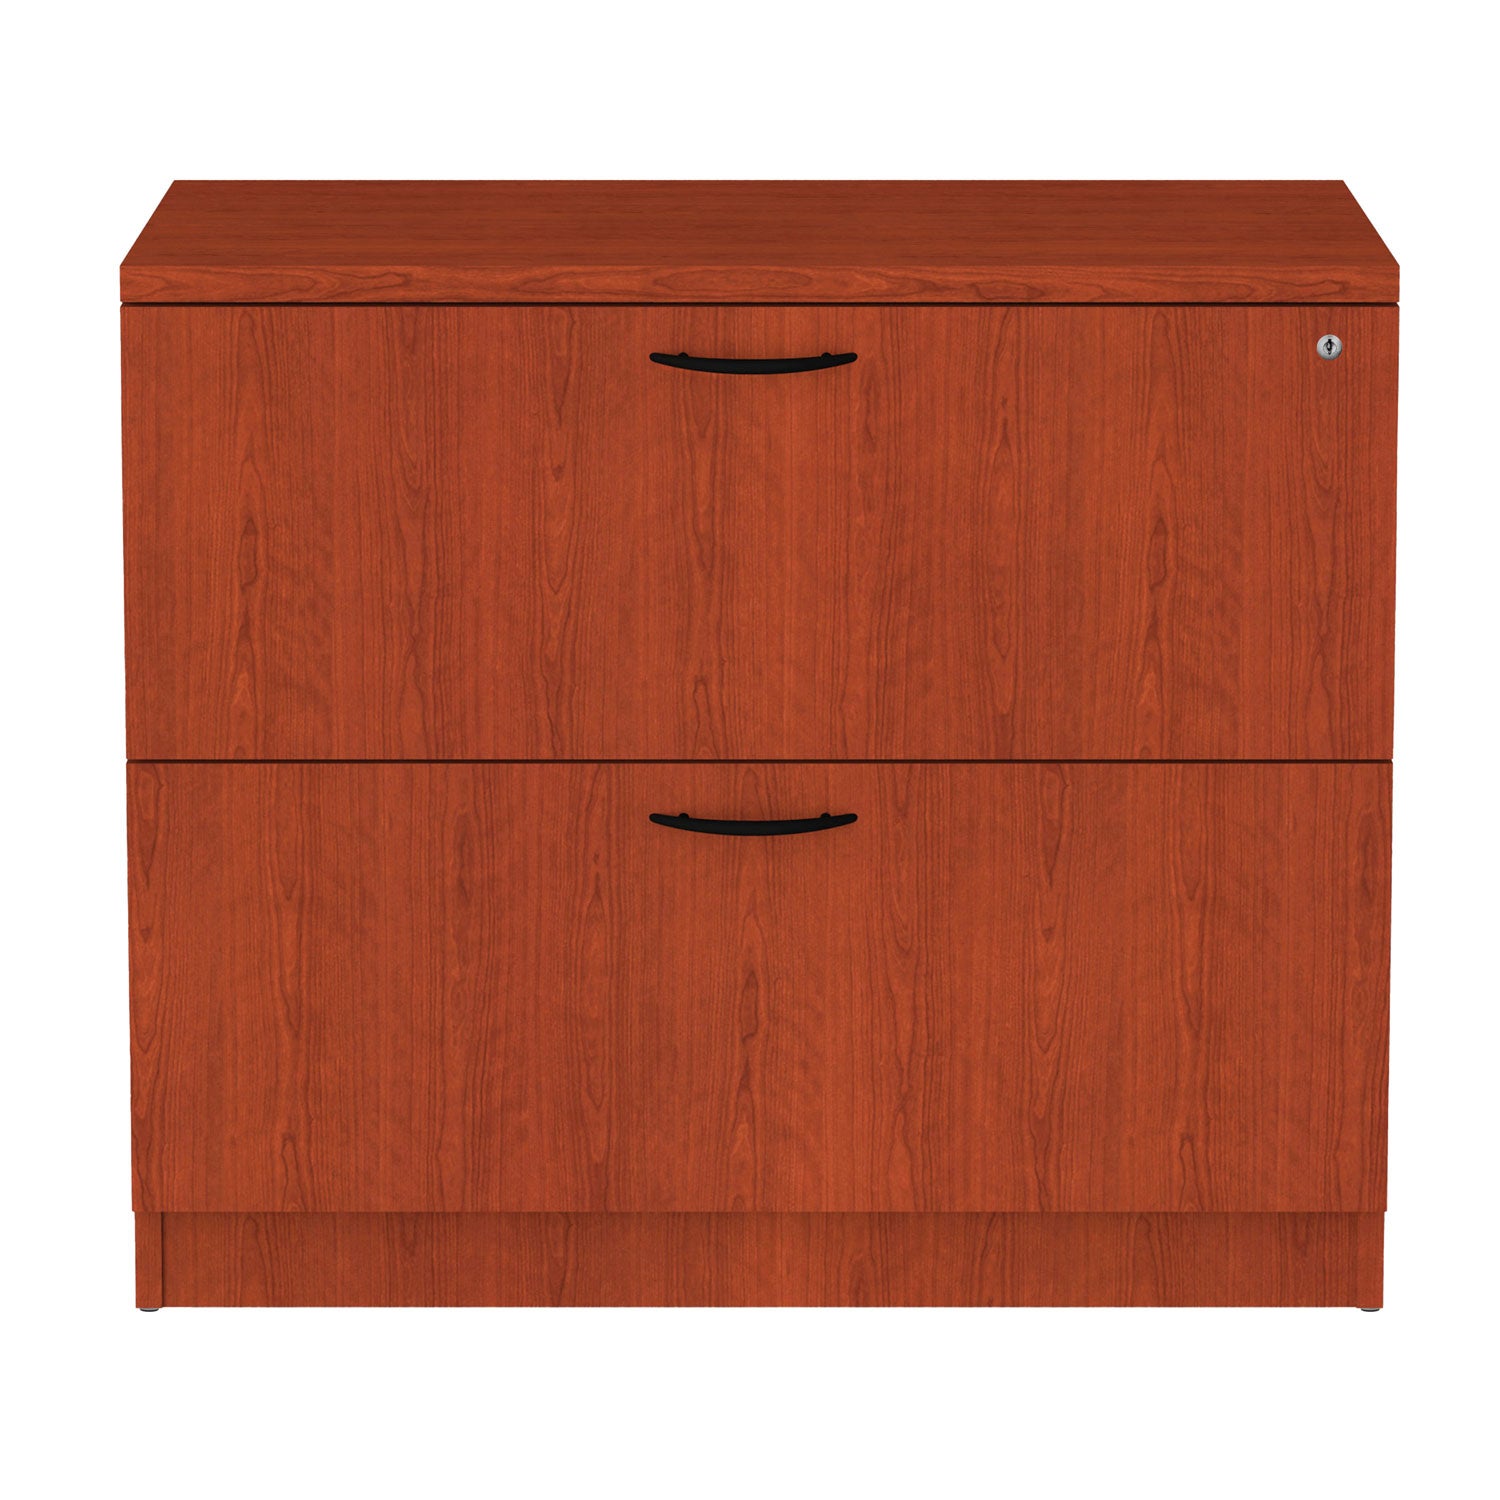 Alera Valencia Series Lateral File, 2 Legal/Letter-Size File Drawers, Medium Cherry, 34" x 22.75" x 29.5 - 